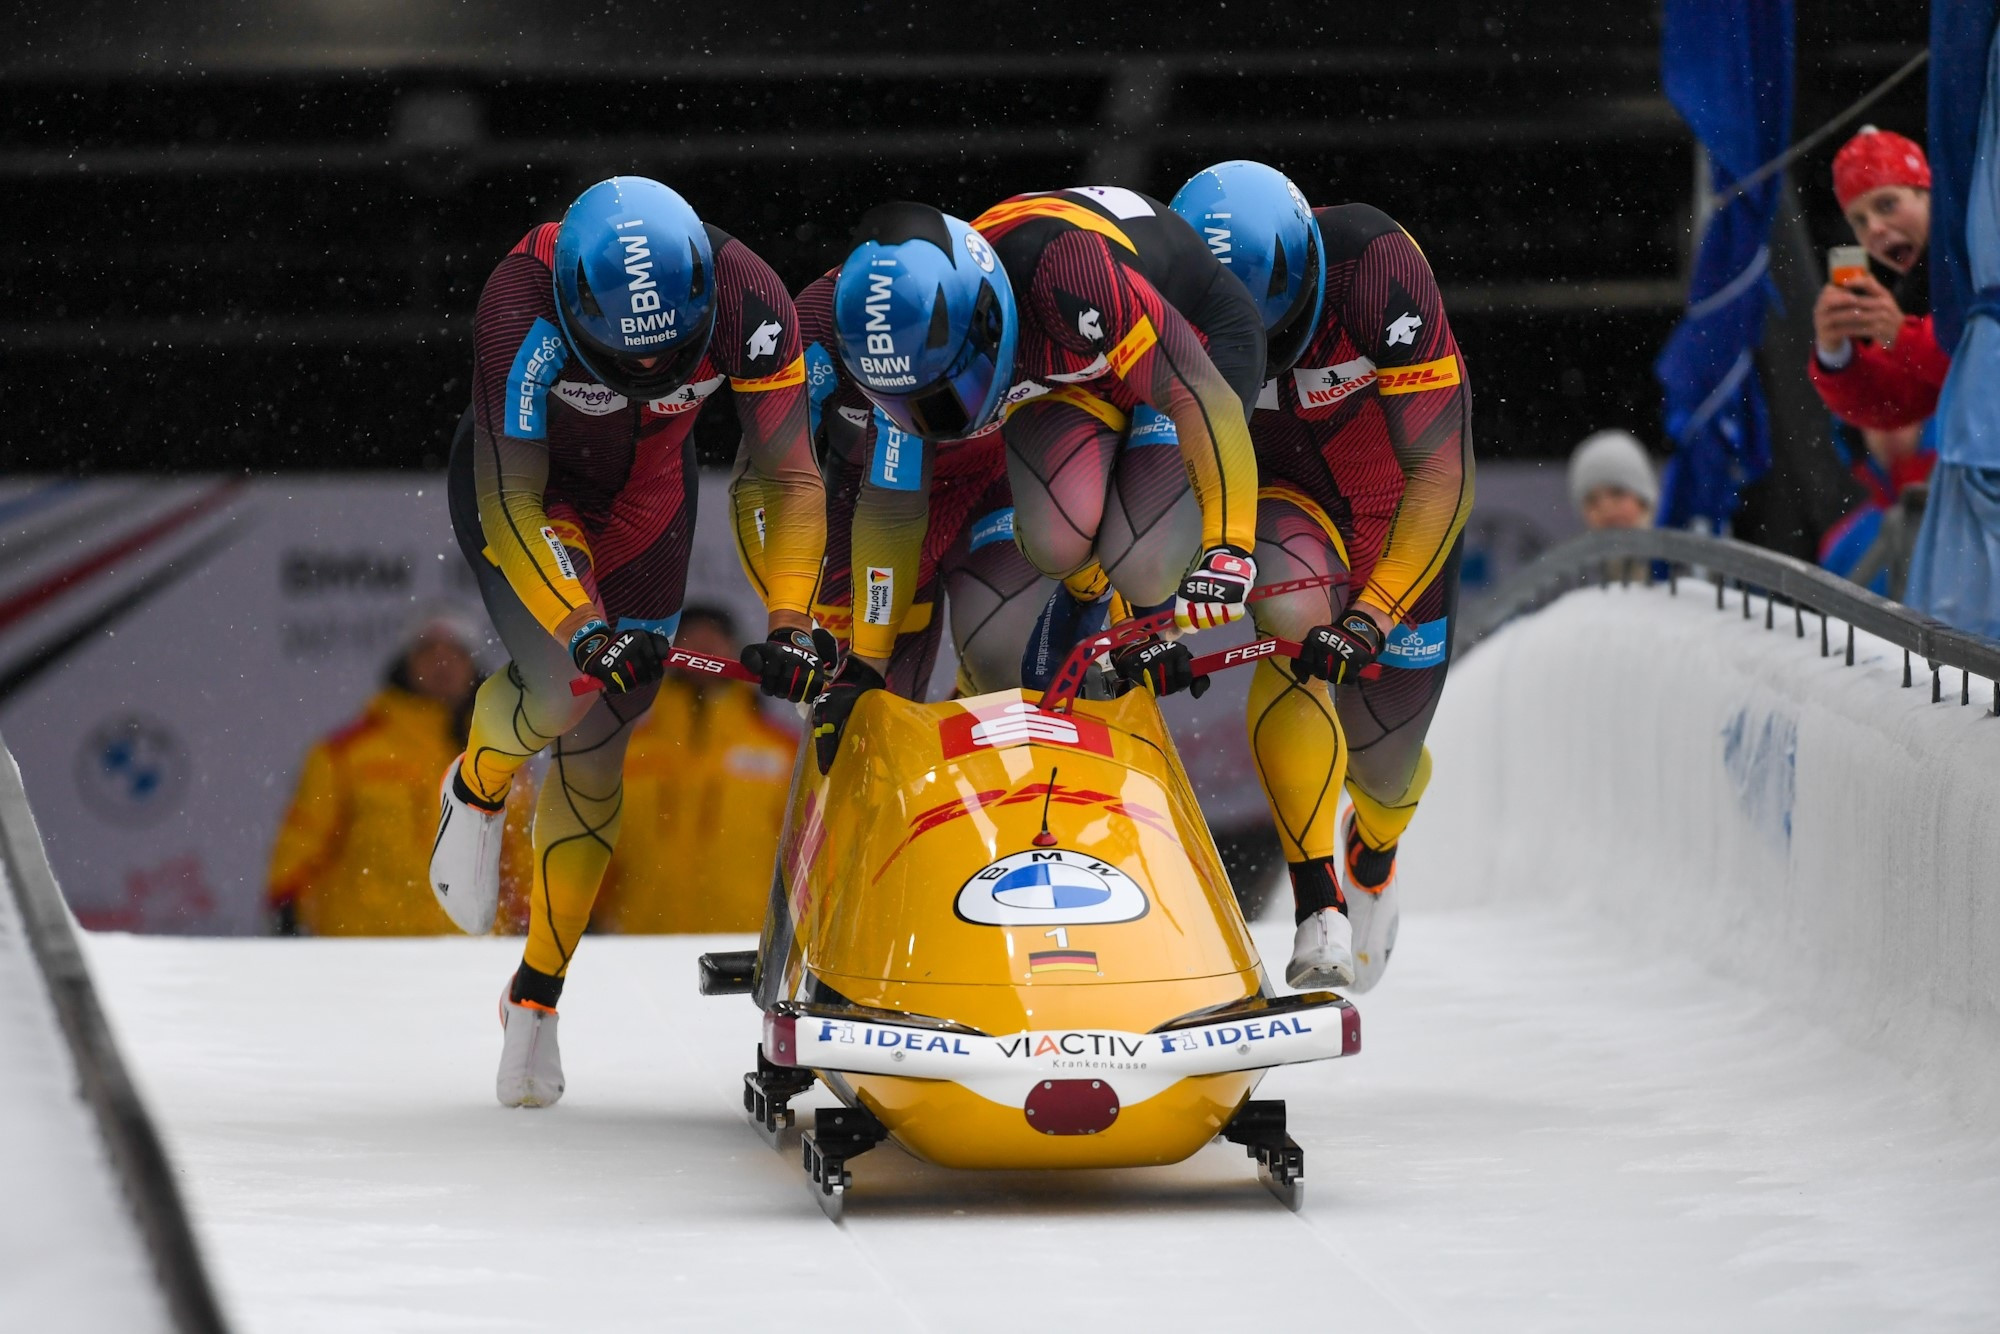 Francesco Friedrich piloted Germany's four-man bobsleigh team to victory in Whistler ©IBSF